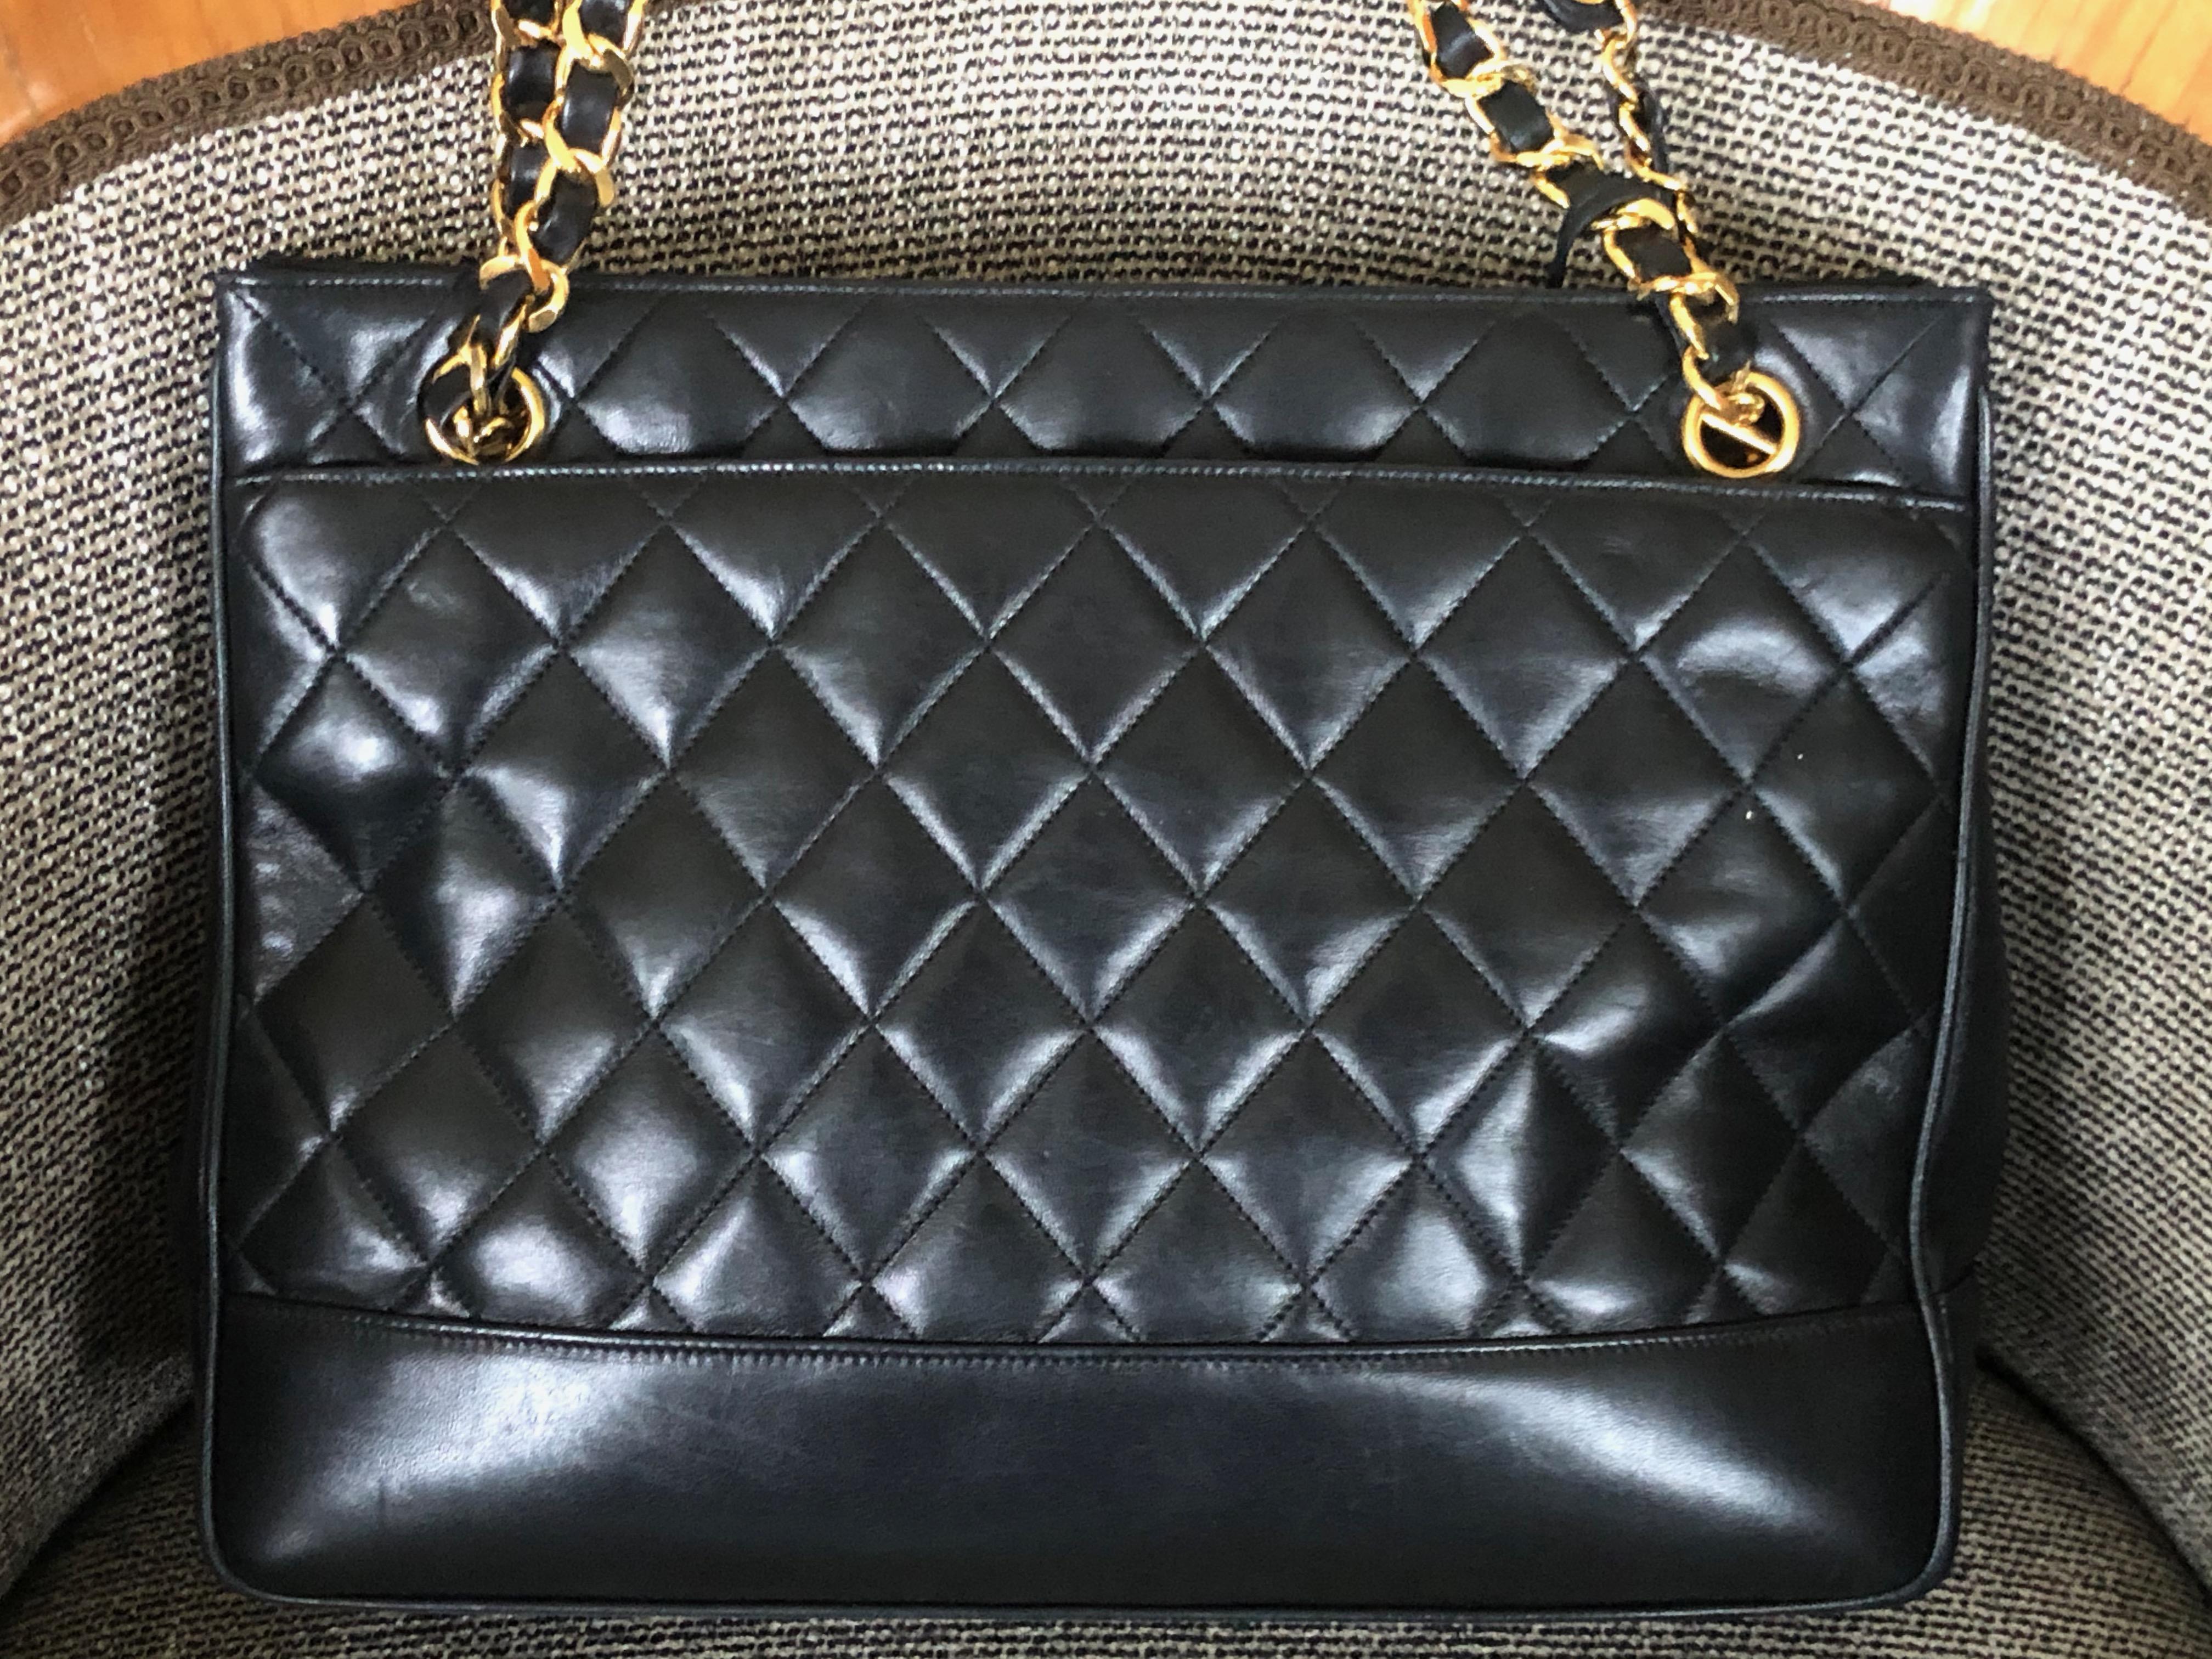 Women's or Men's Chanel Large Black Leather Shoulder Bag with Gold Hardware and Quilted Details  For Sale